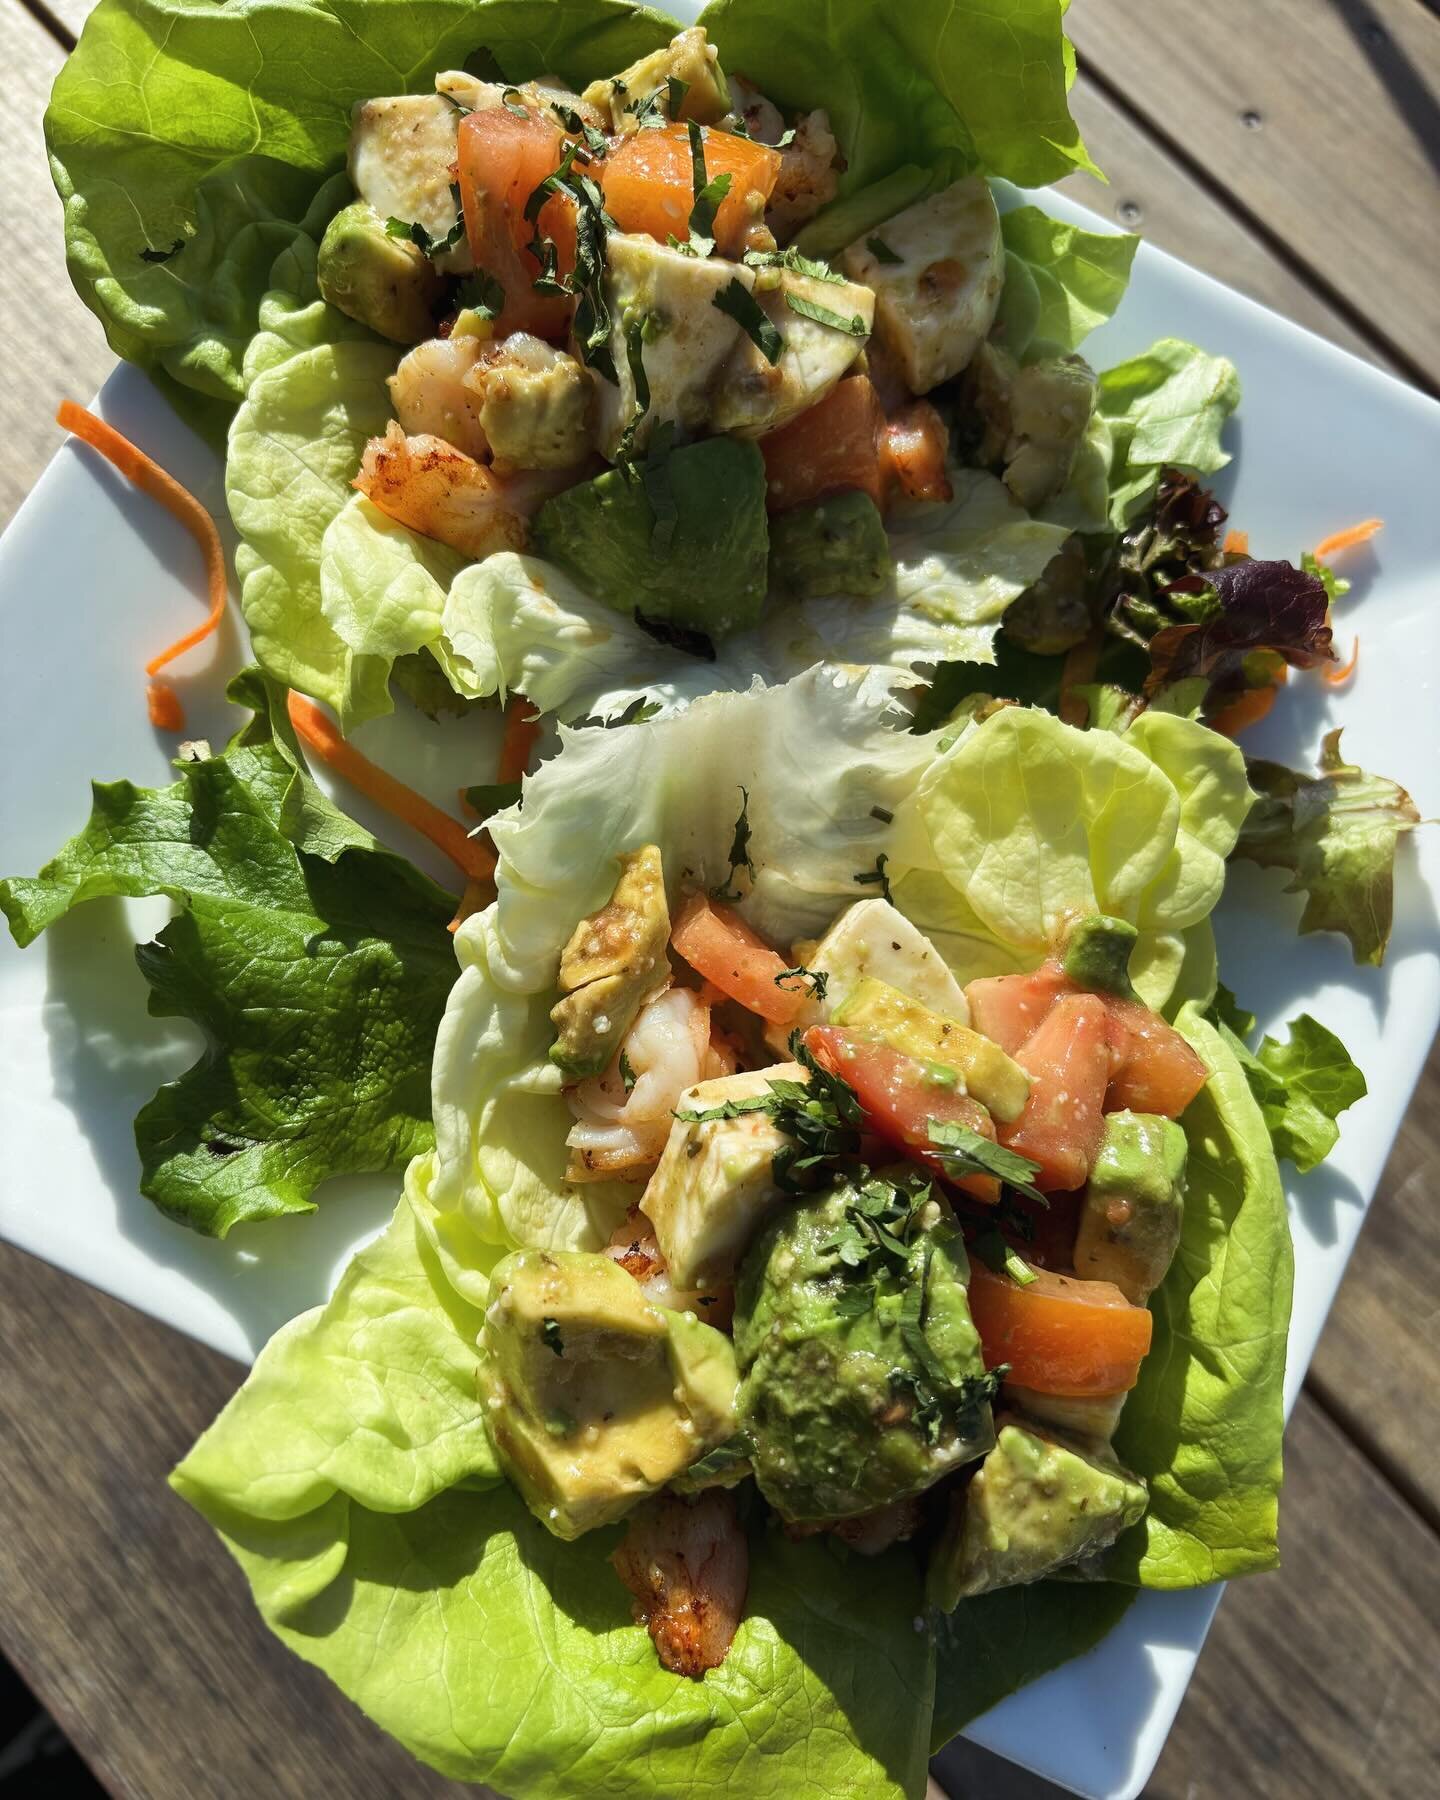 Come enjoy this beautiful weather!! ☀️ Serving up our Grilled Prawn Lettuce Wraps 😋 #paradisebeachcapitola #capitolavillage #smallbusiness